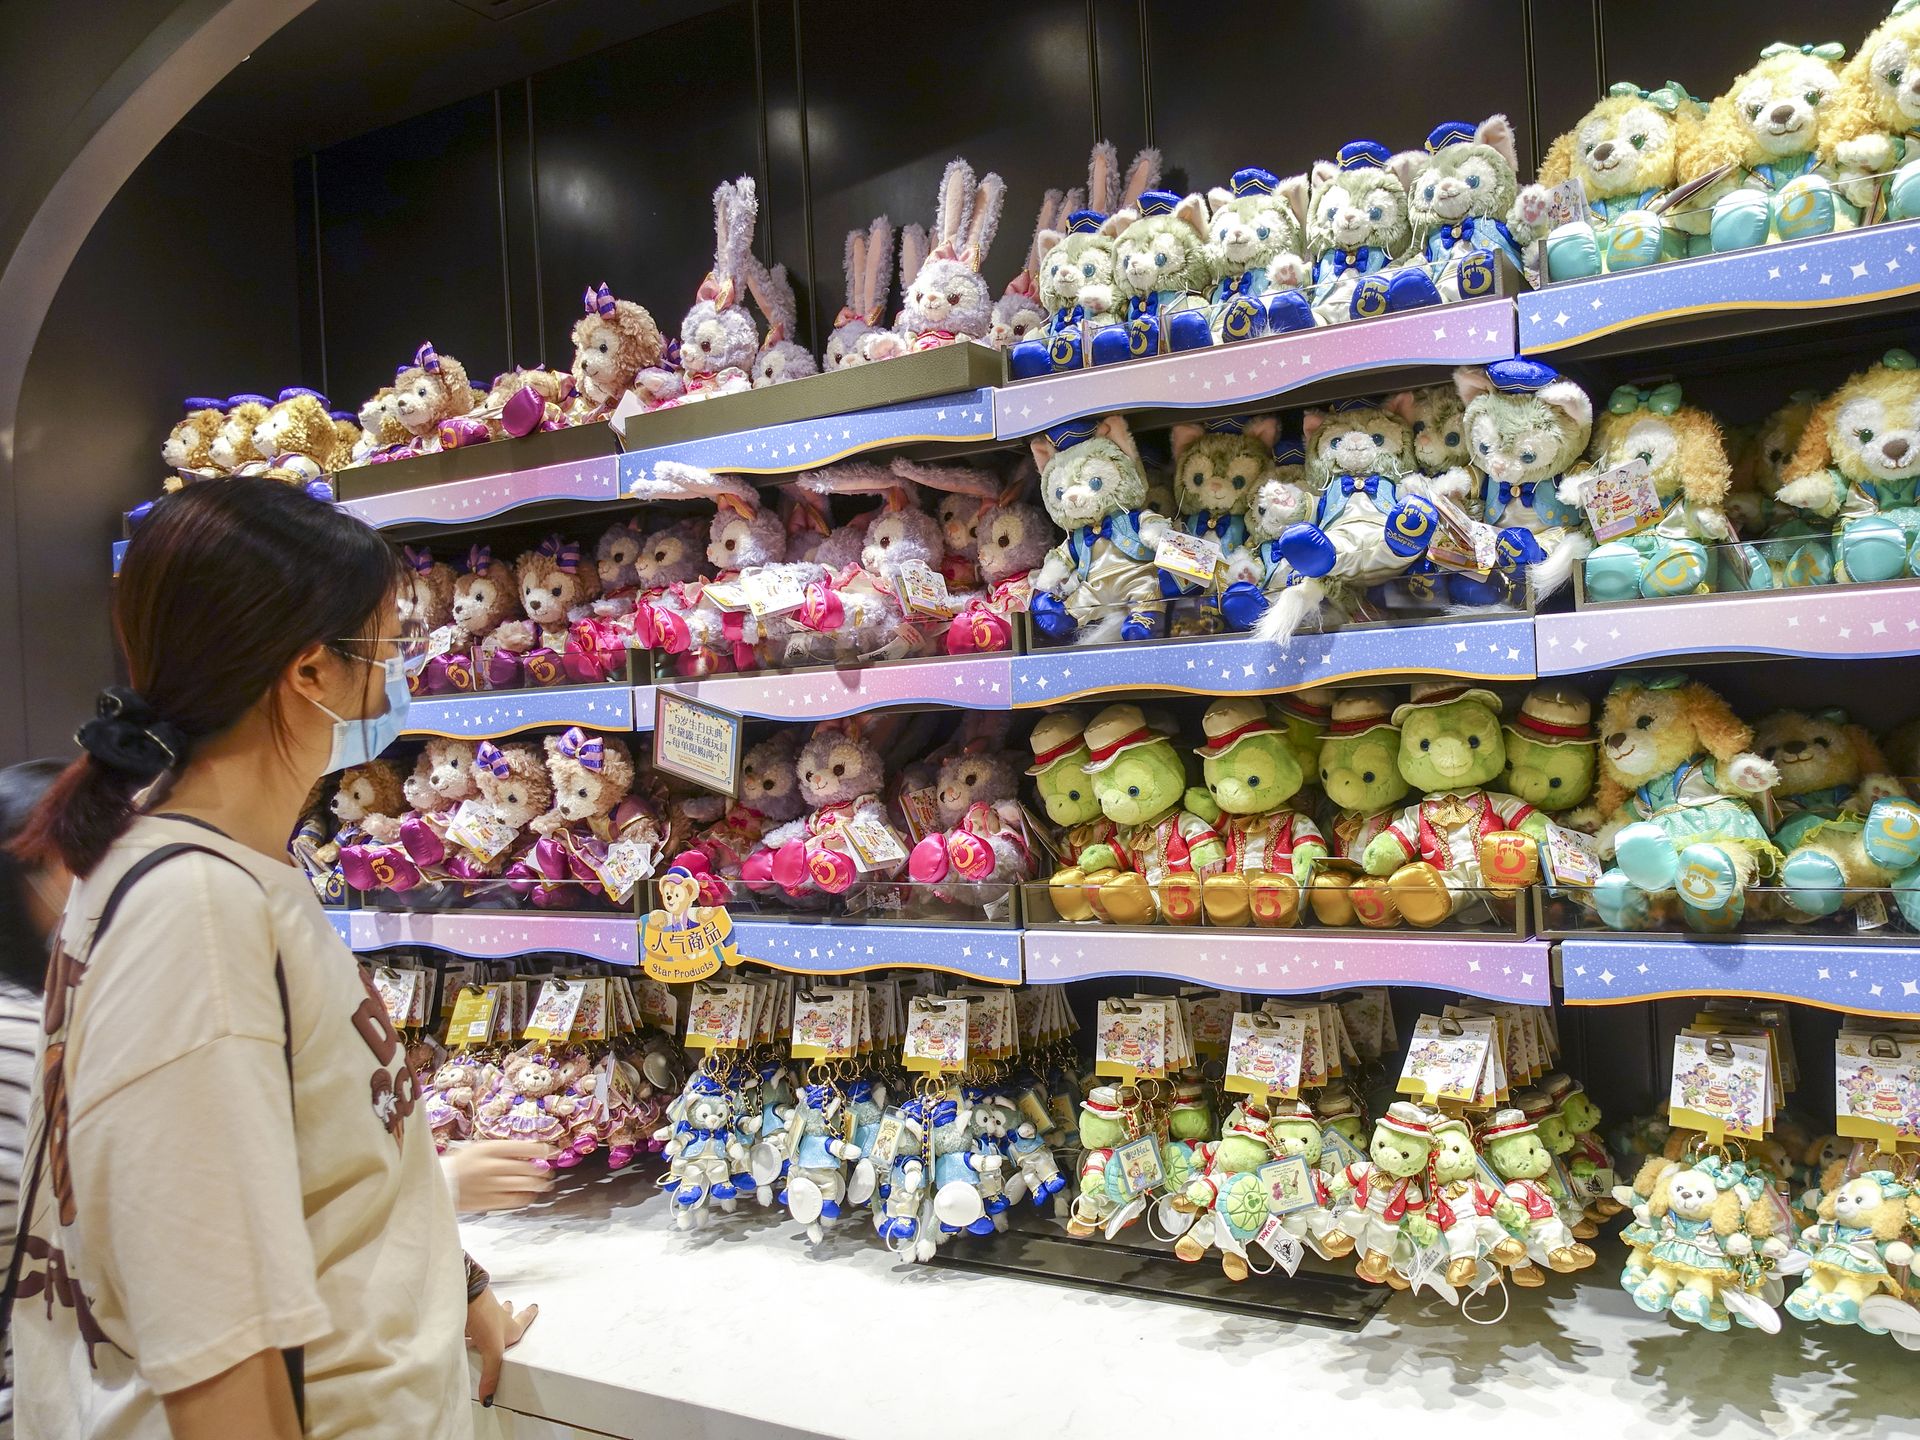 Retail stores to sell smaller, toys this holiday